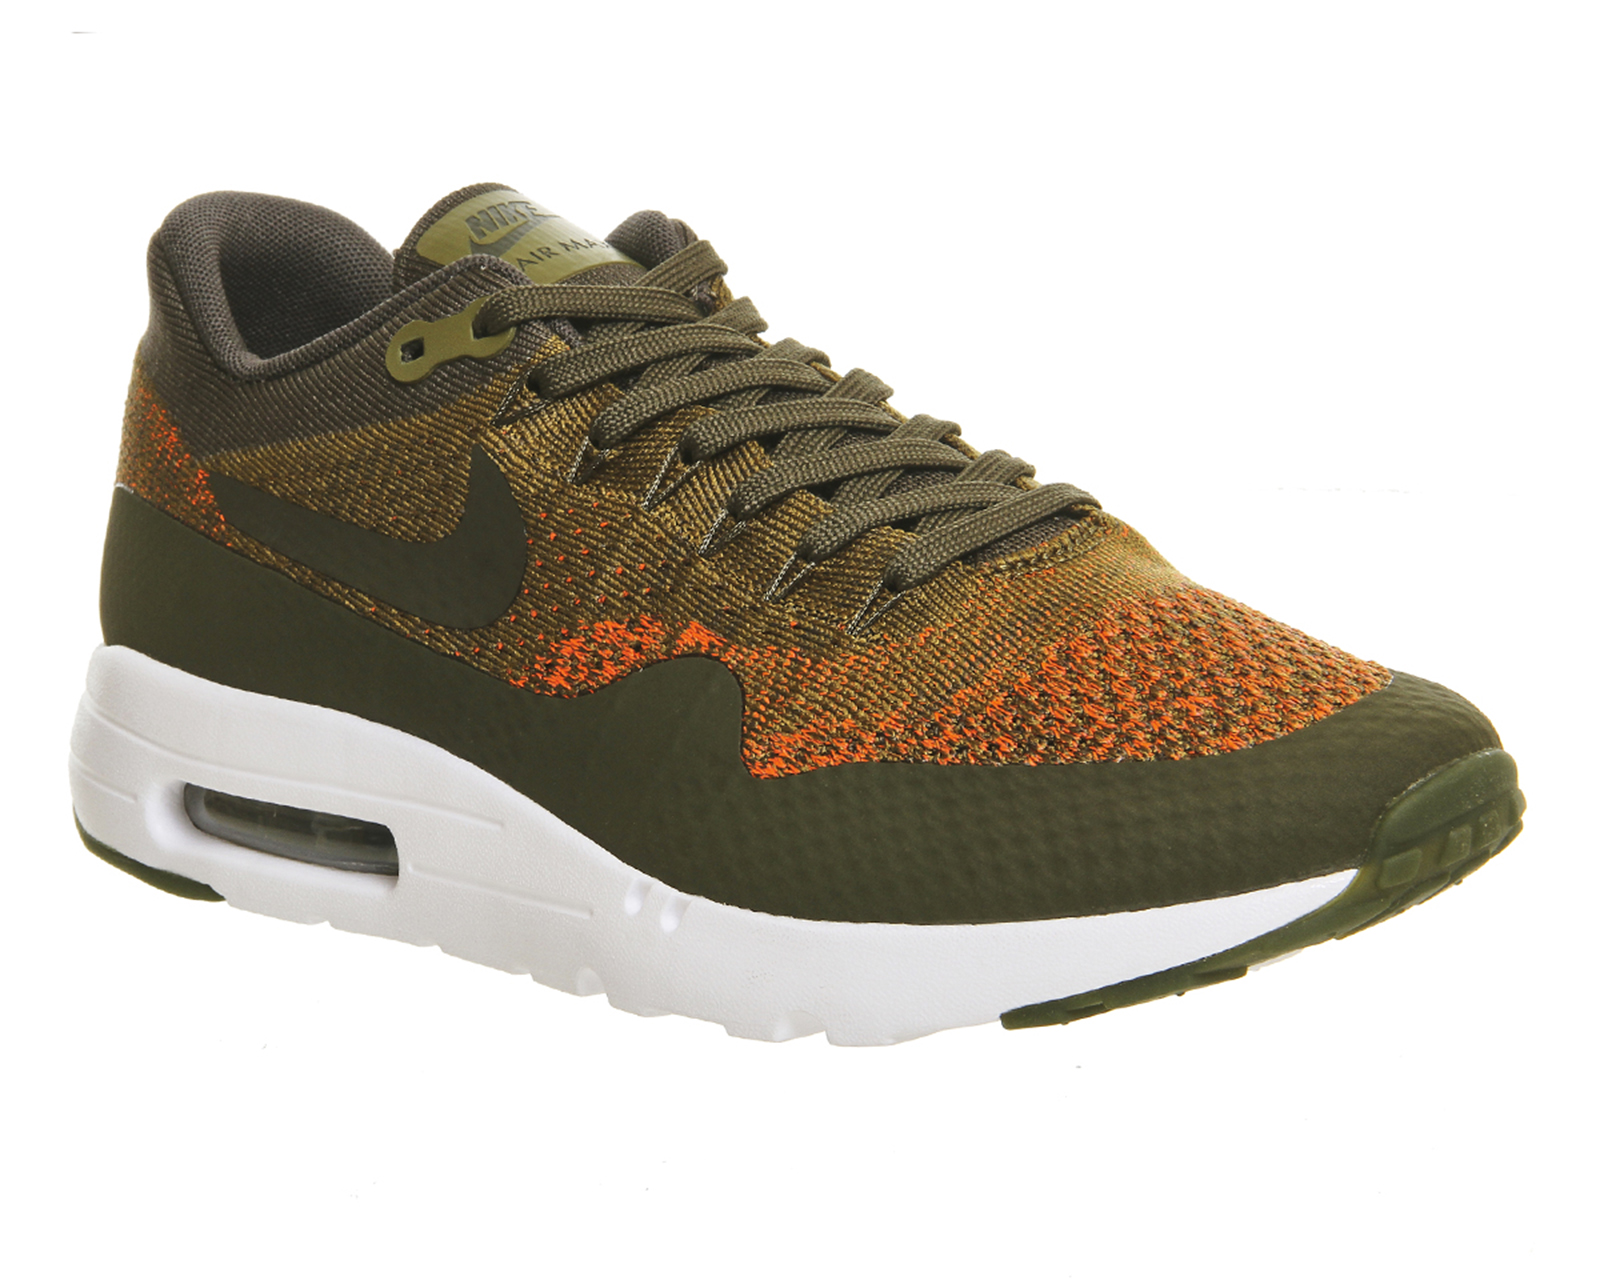 NikeAir Max 1 Ultra FlyknitOlive Olive